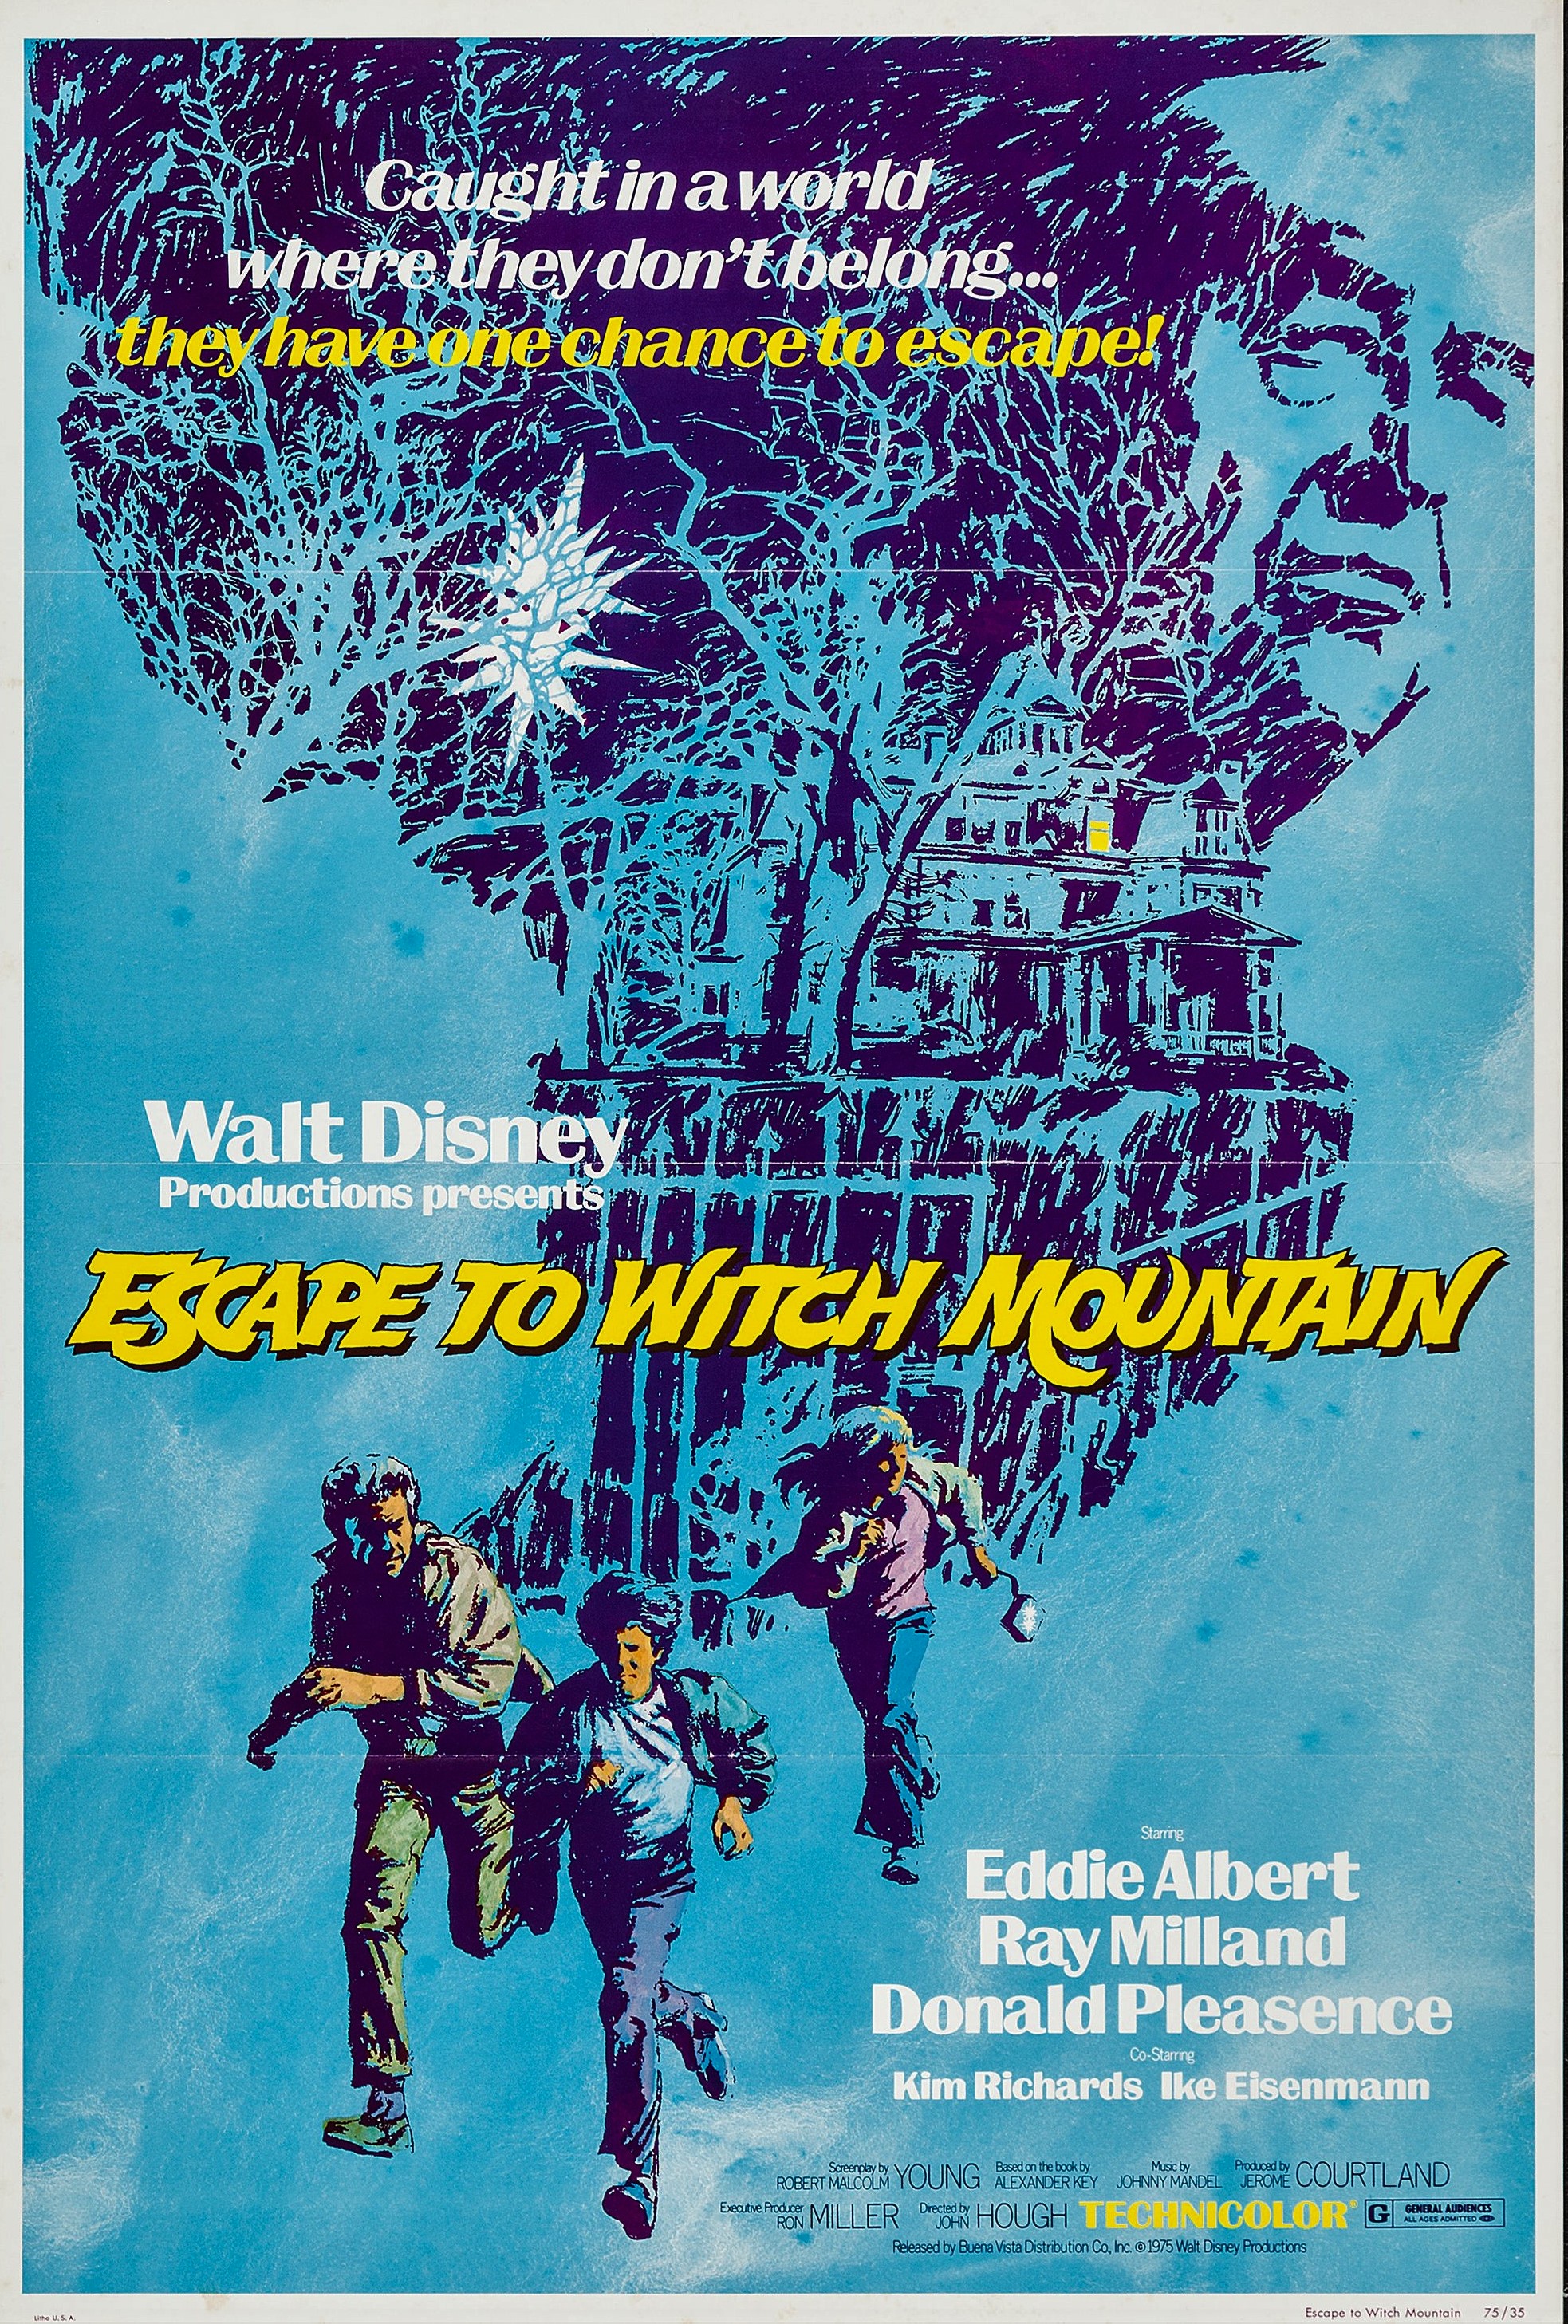 escape to witch mountain 1975 - Caught in a world where they don't belong... theyhave one chance to escape! 24. Productions Walt Disney Eare To Watch Mountain Eddie Albert Ray Milland Donald Pleasence Kim Stichards Ike Eisenmann Orld Mercool W